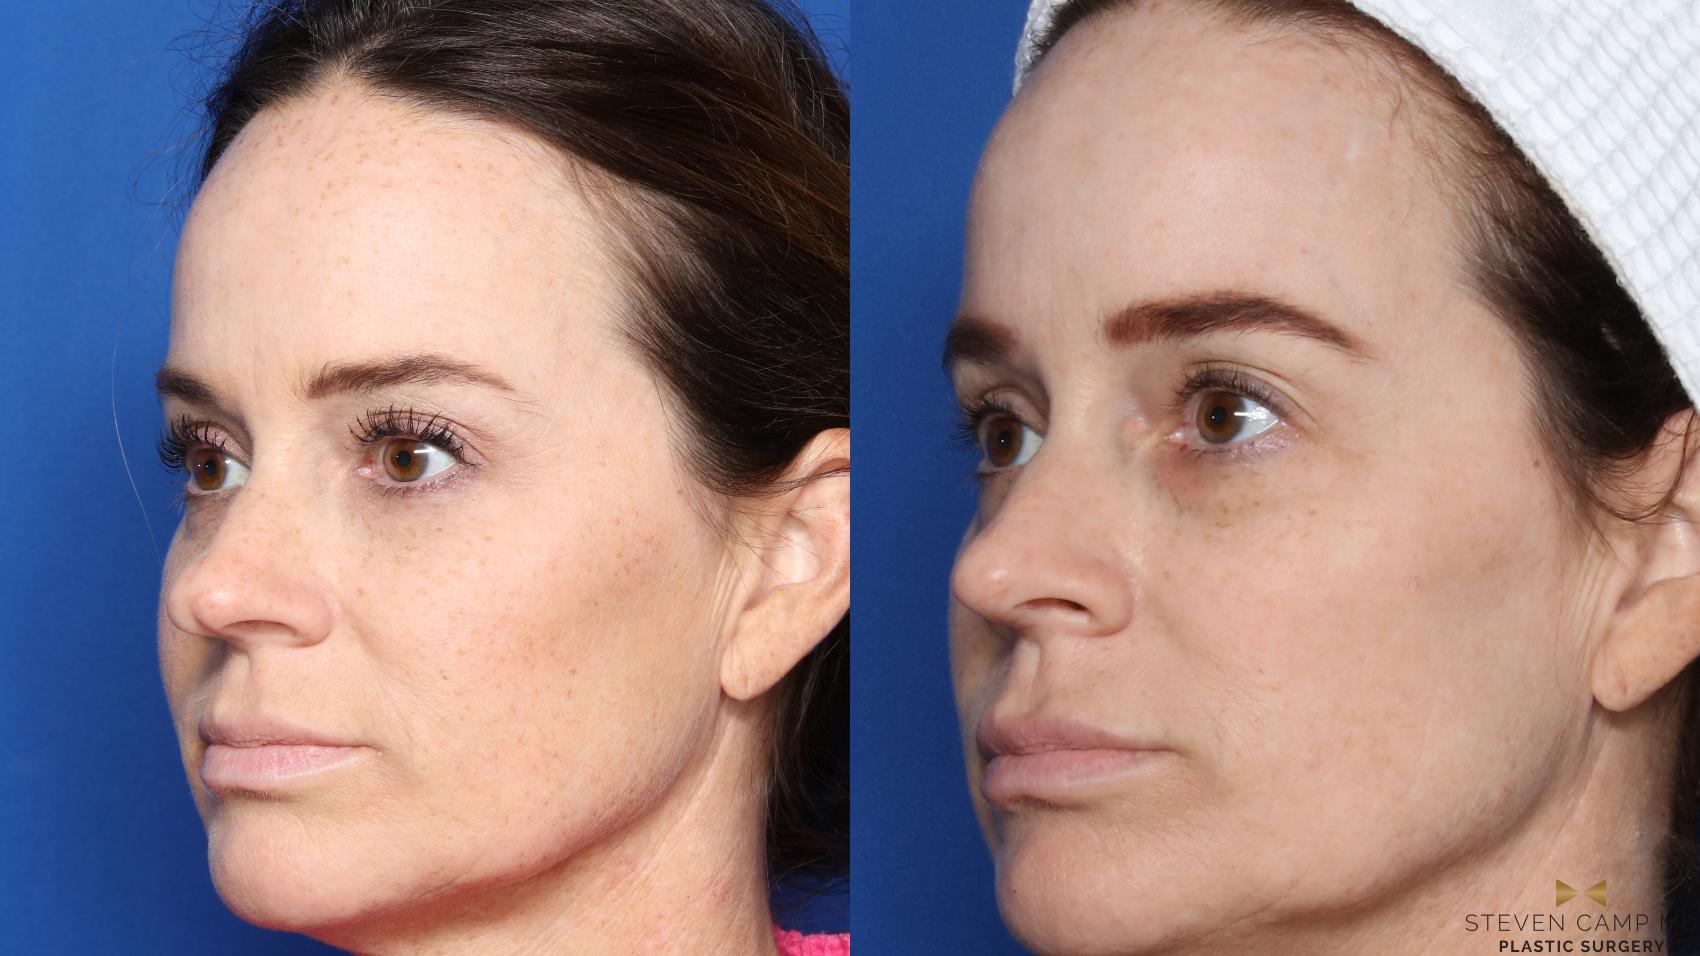 Rhinoplasty Before & After Photo | Fort Worth, Texas | Steven Camp MD Plastic Surgery